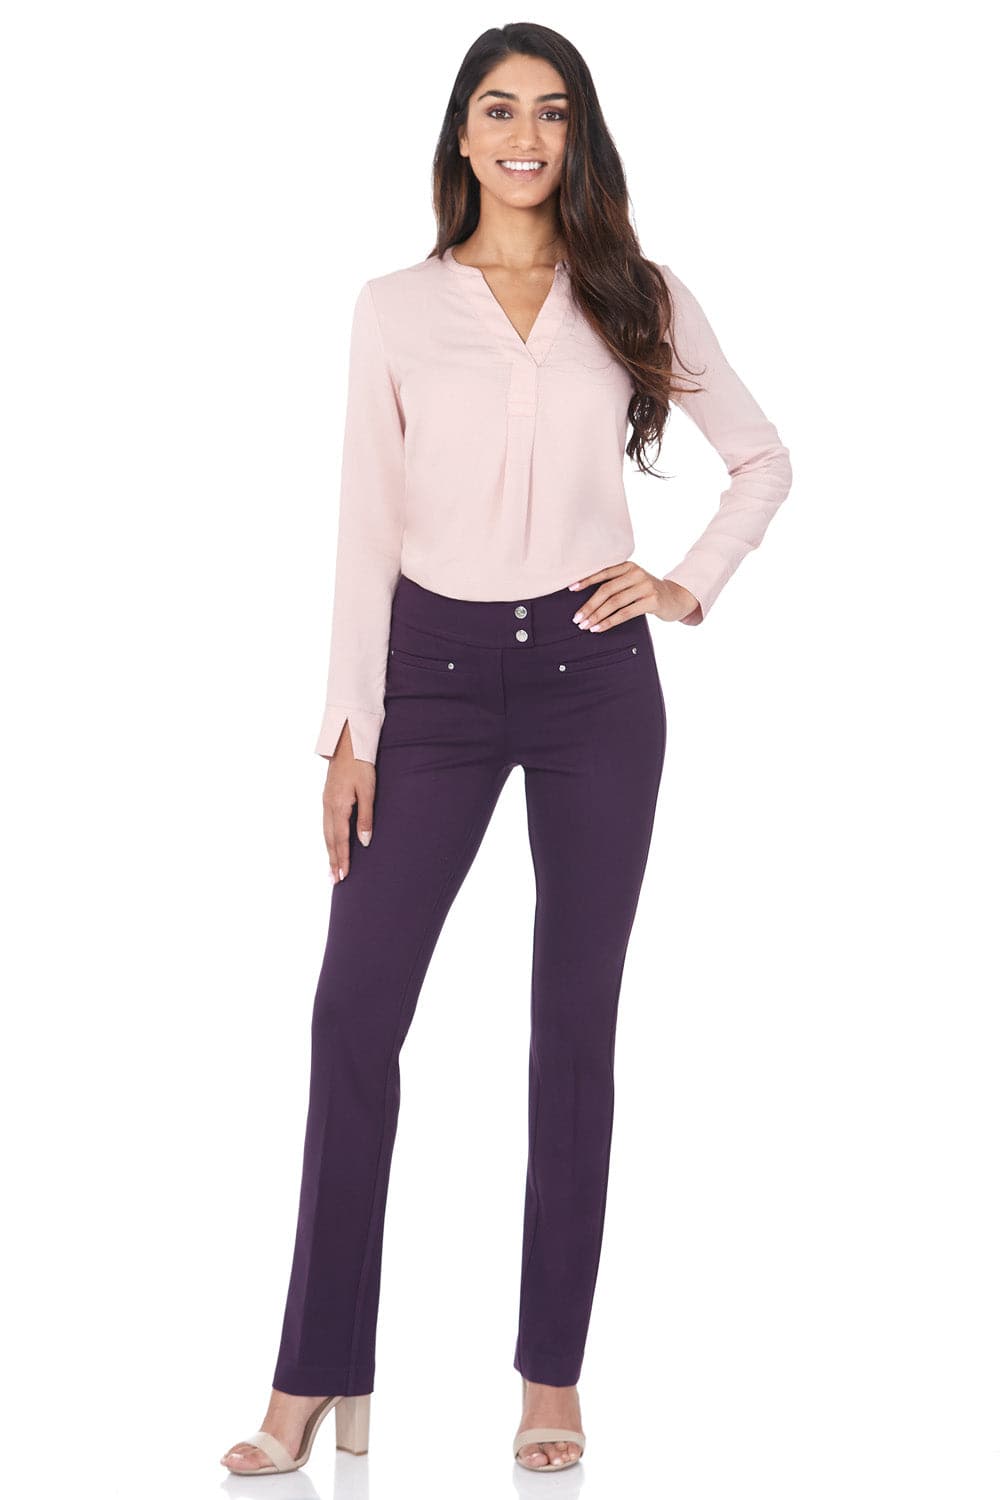 Rekucci Women's Ease Into Comfort Pull-On Straight Pant with